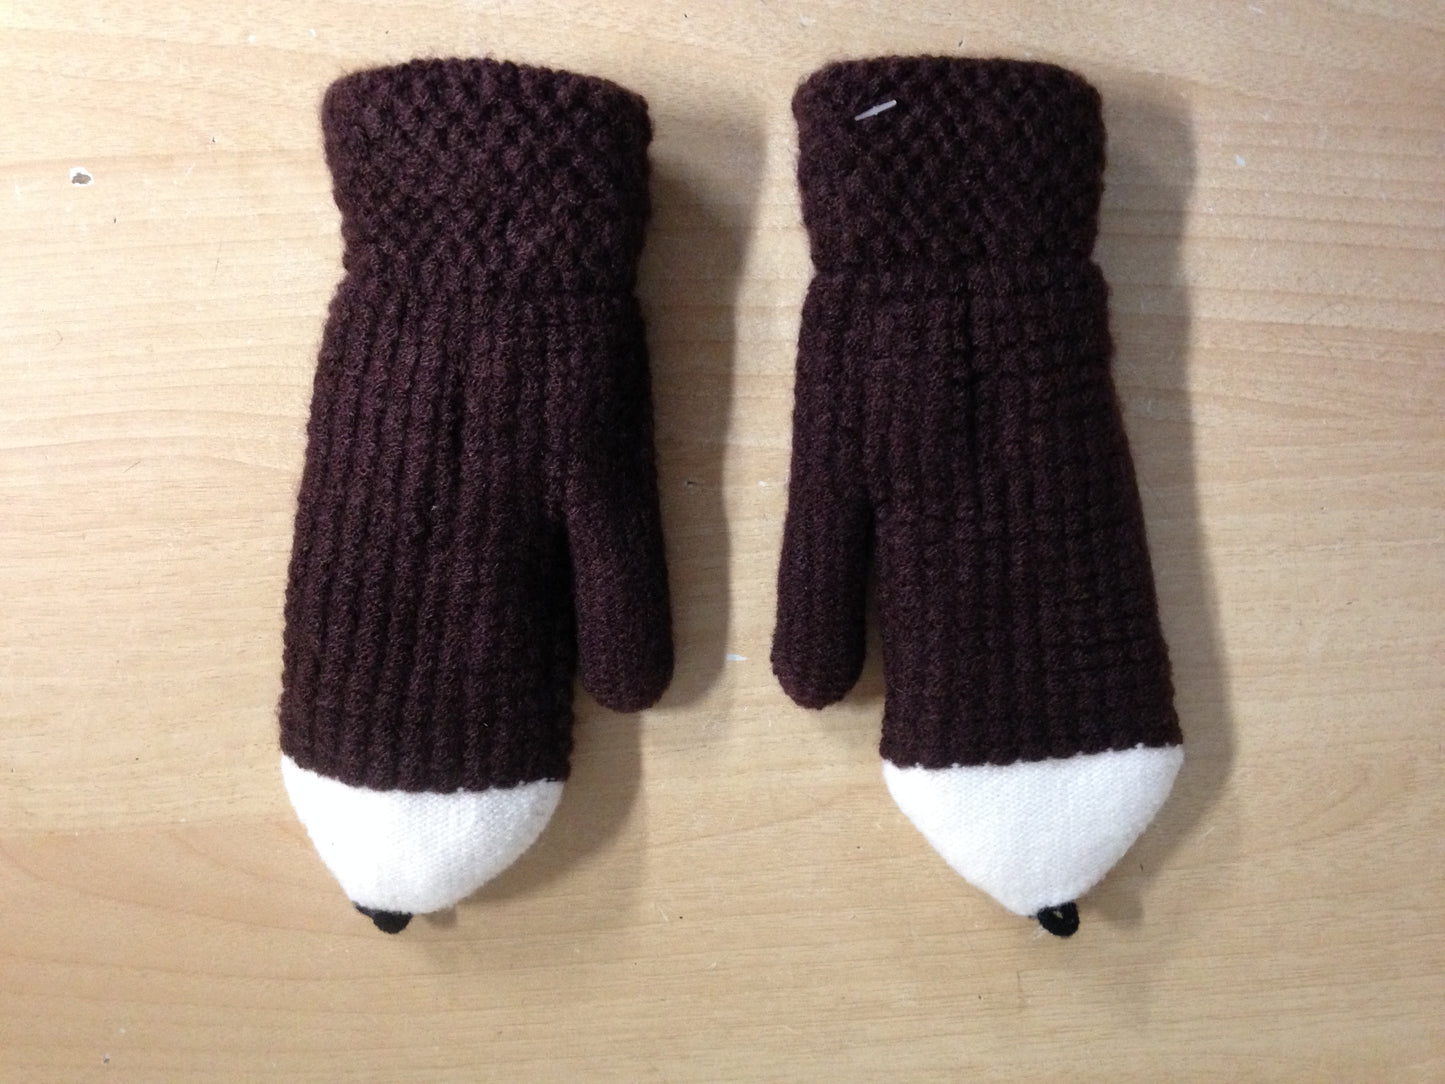 Winter Gloves and Mitts Child Size 10-12 Possum Knit Plush Inside New Demo Model